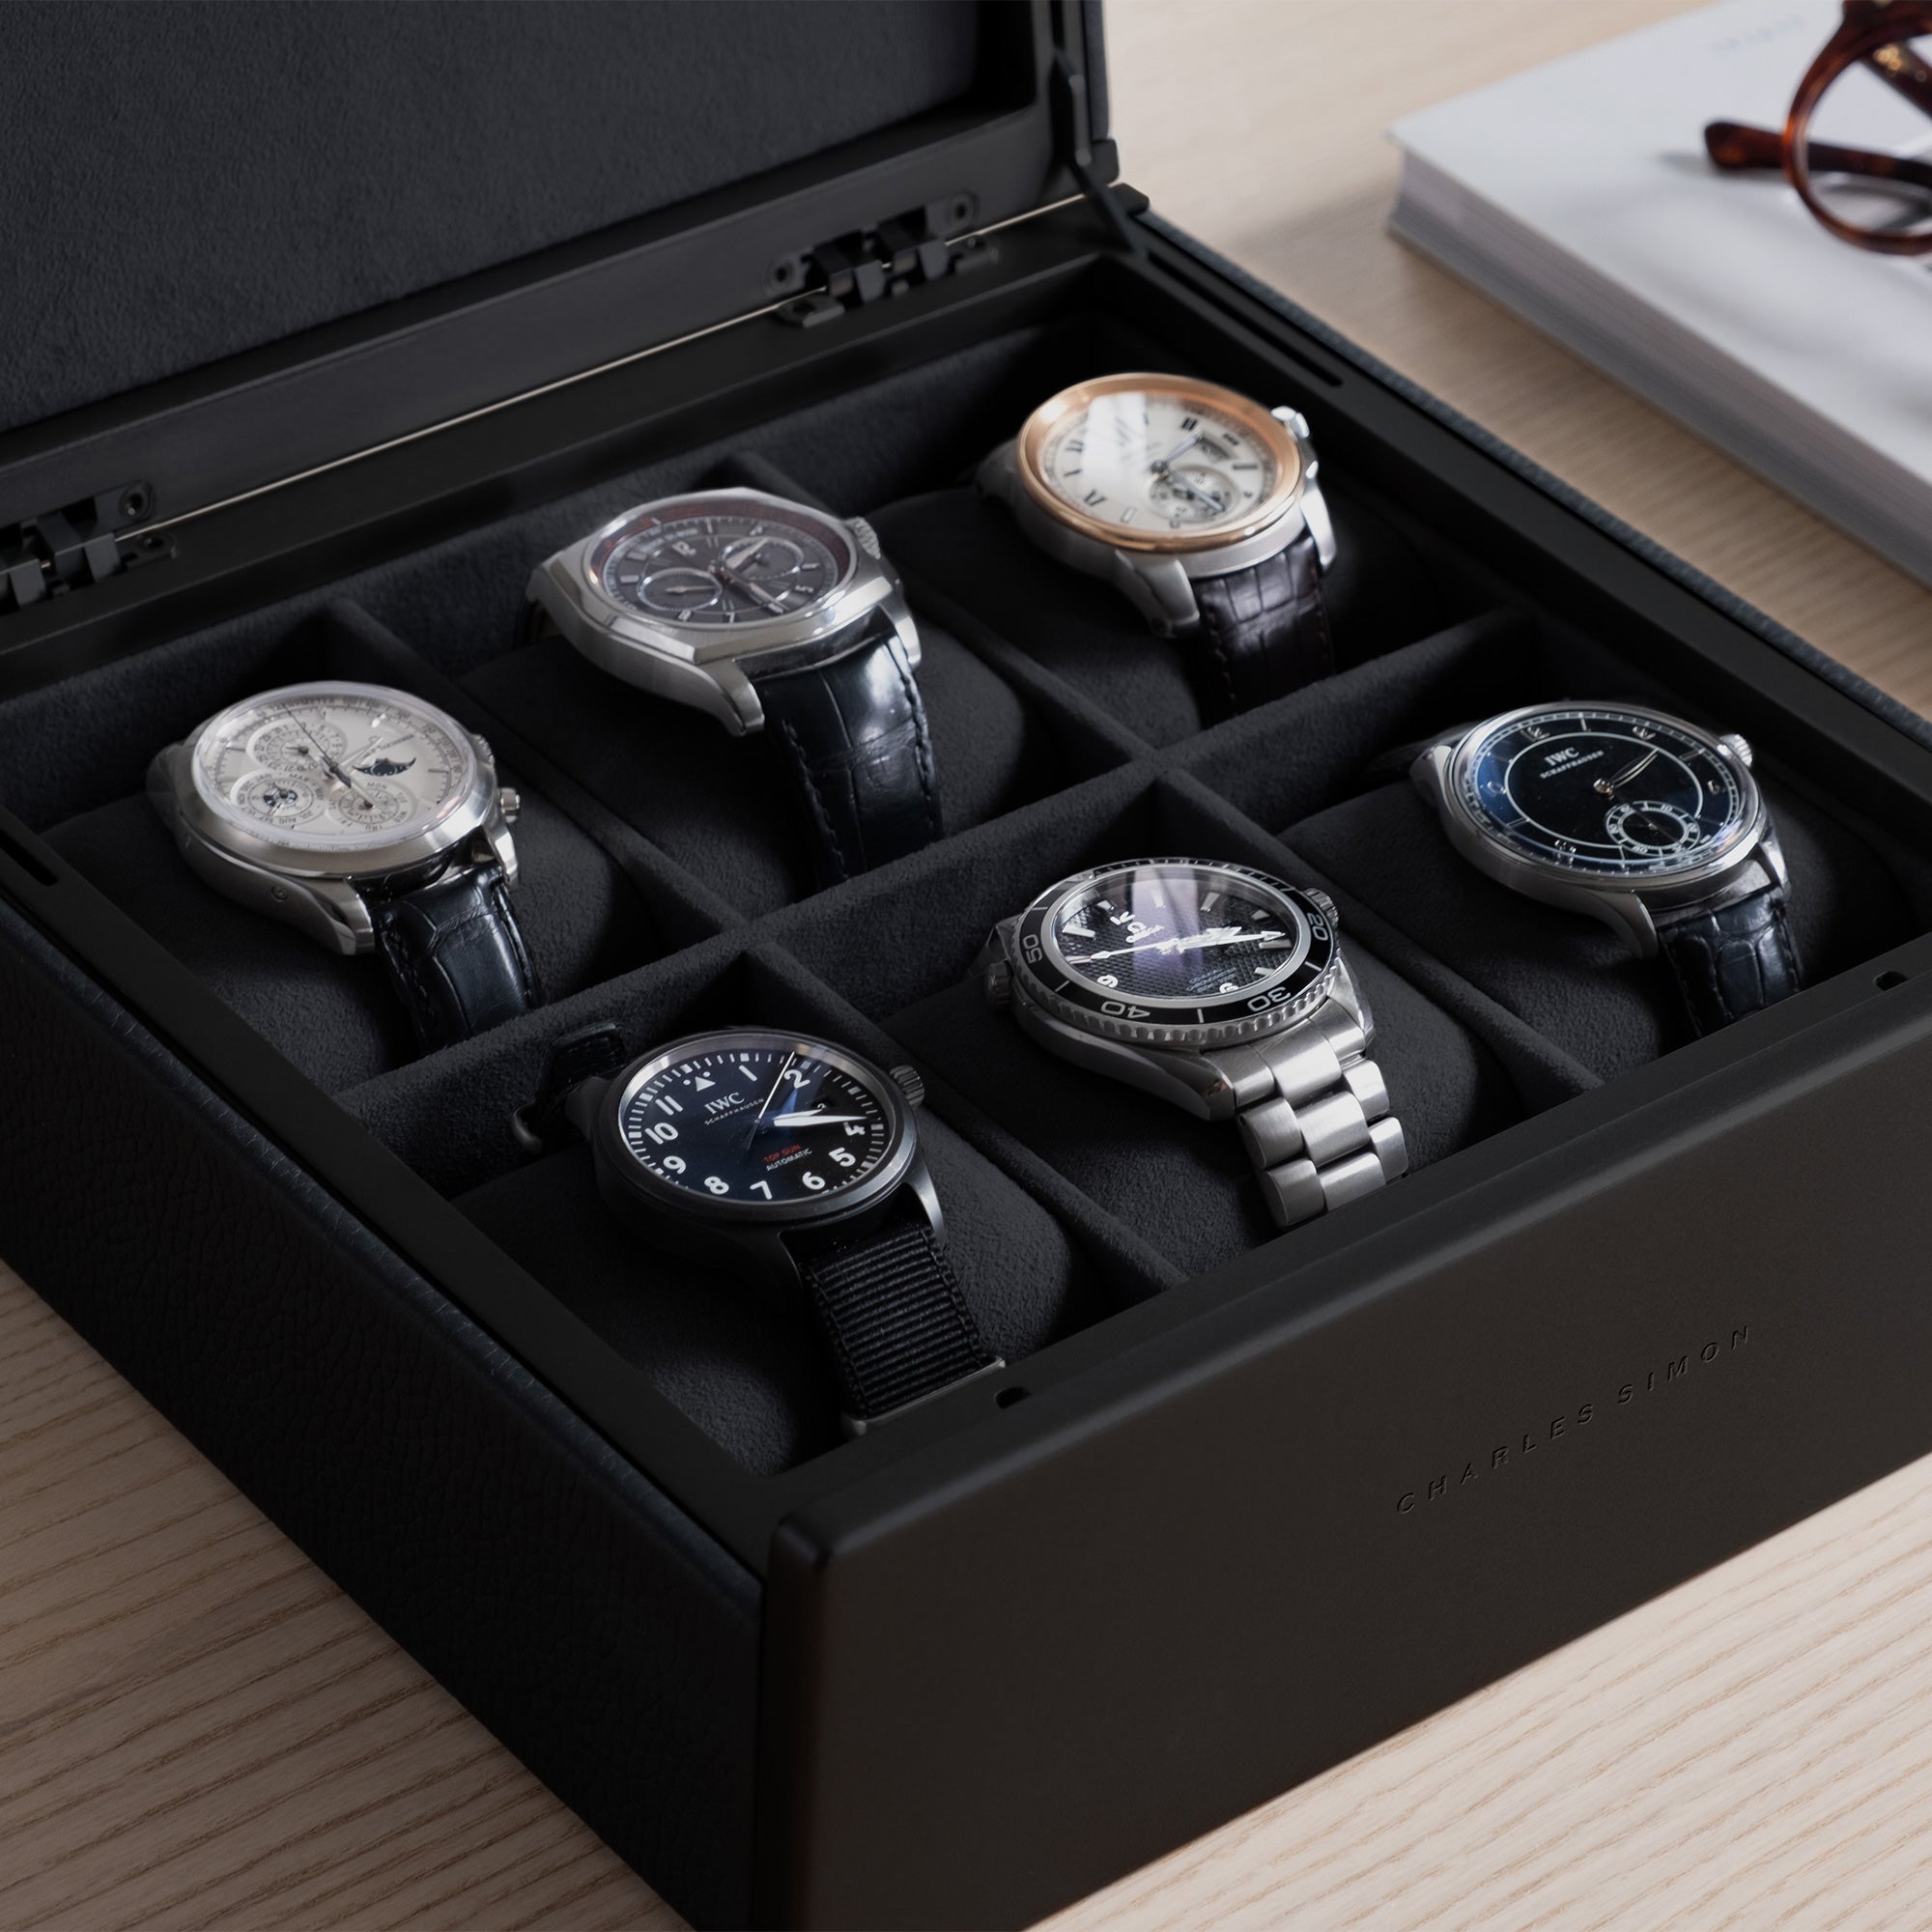 Detail shot of six luxury watches displayed in the all black Spence 6 watch box